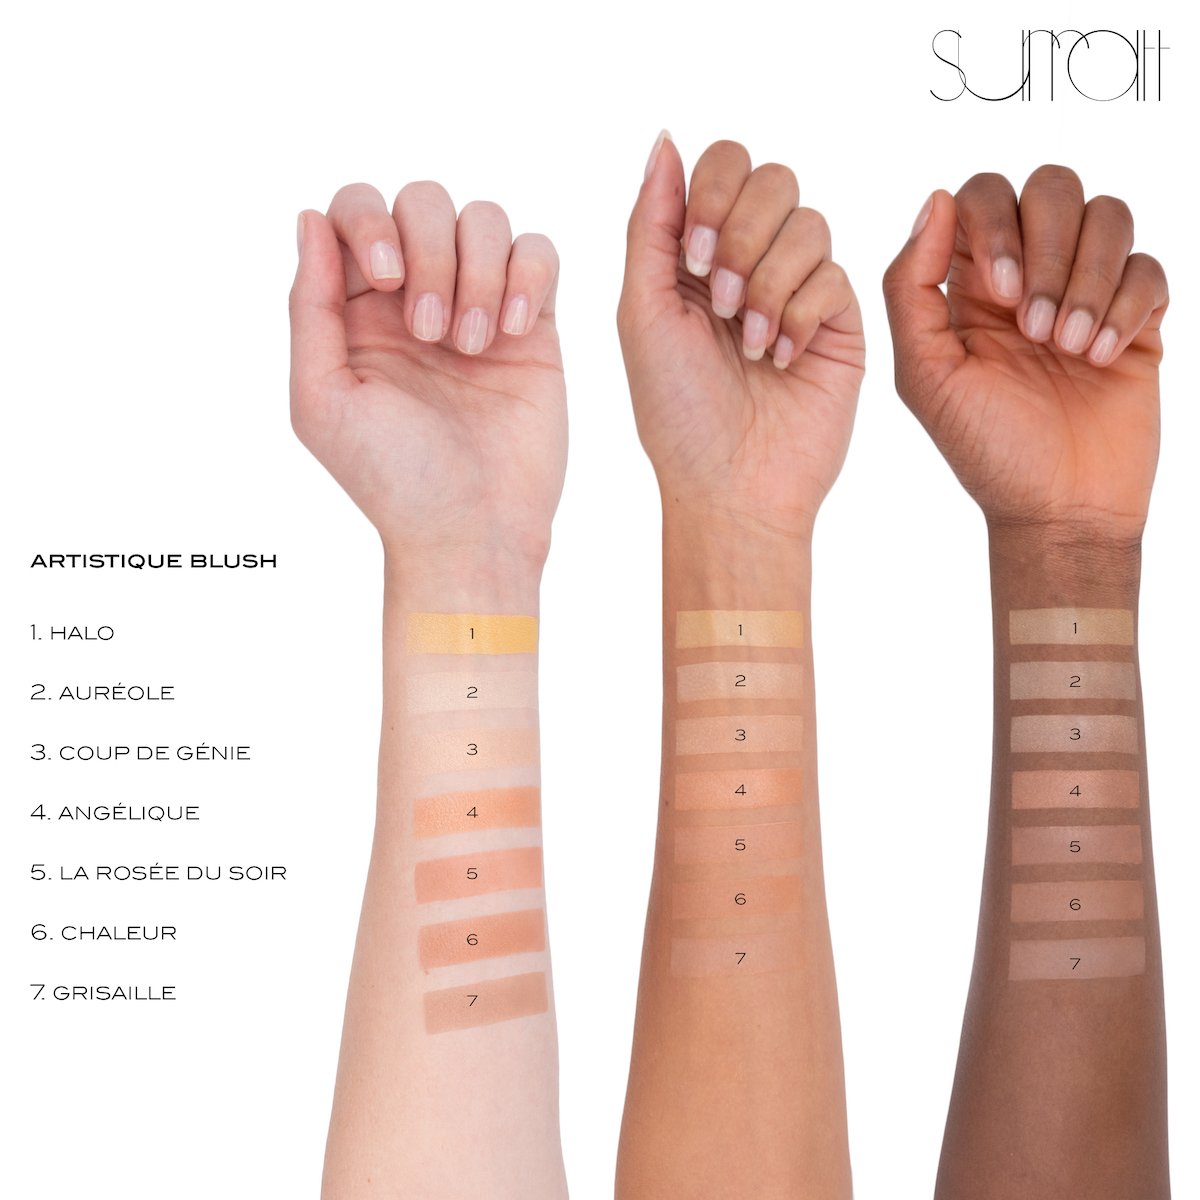 ALLVAR - powder blush, highlight and contour swatches on various skin tones shade grouping 1